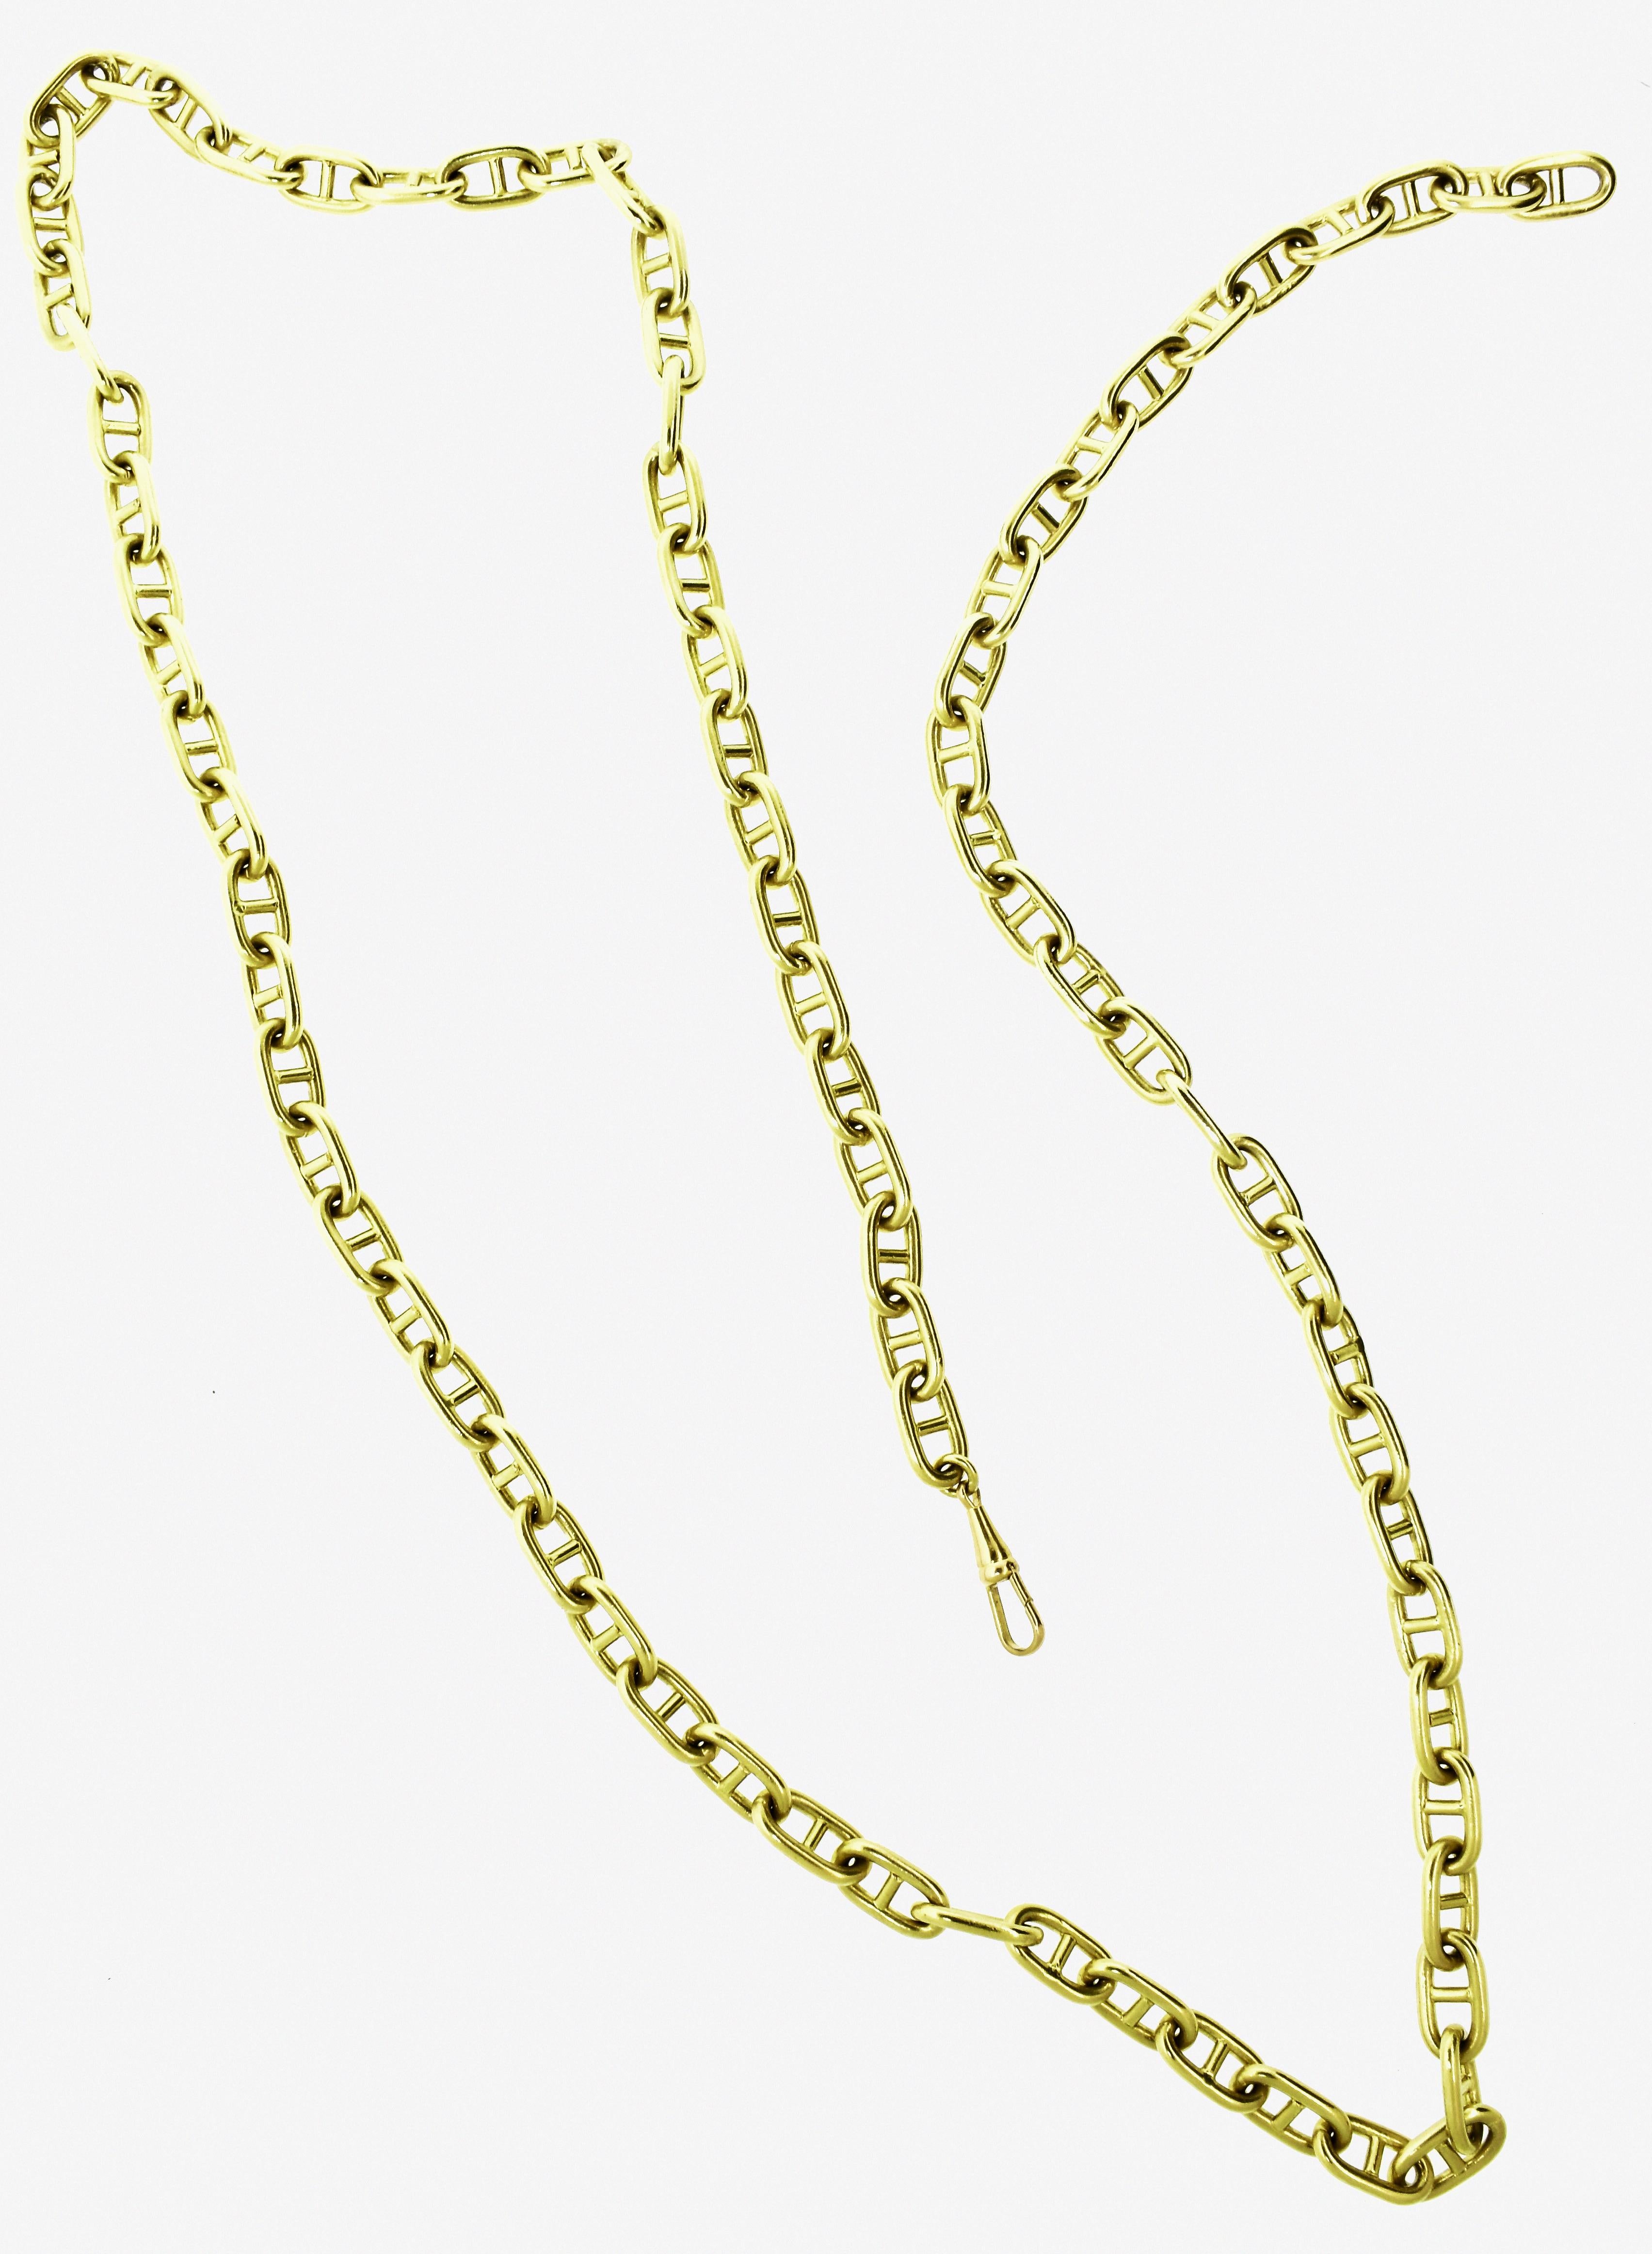 Bvlgari 18K long vintage chain.  This 36 inch chain is most unusual of this type because it is solid gold and not a light-weight version.  The chain is unusually heavy - weighing 171.2 grams  -that is 5 1/2 troy ounces. (the gold cash value alone is